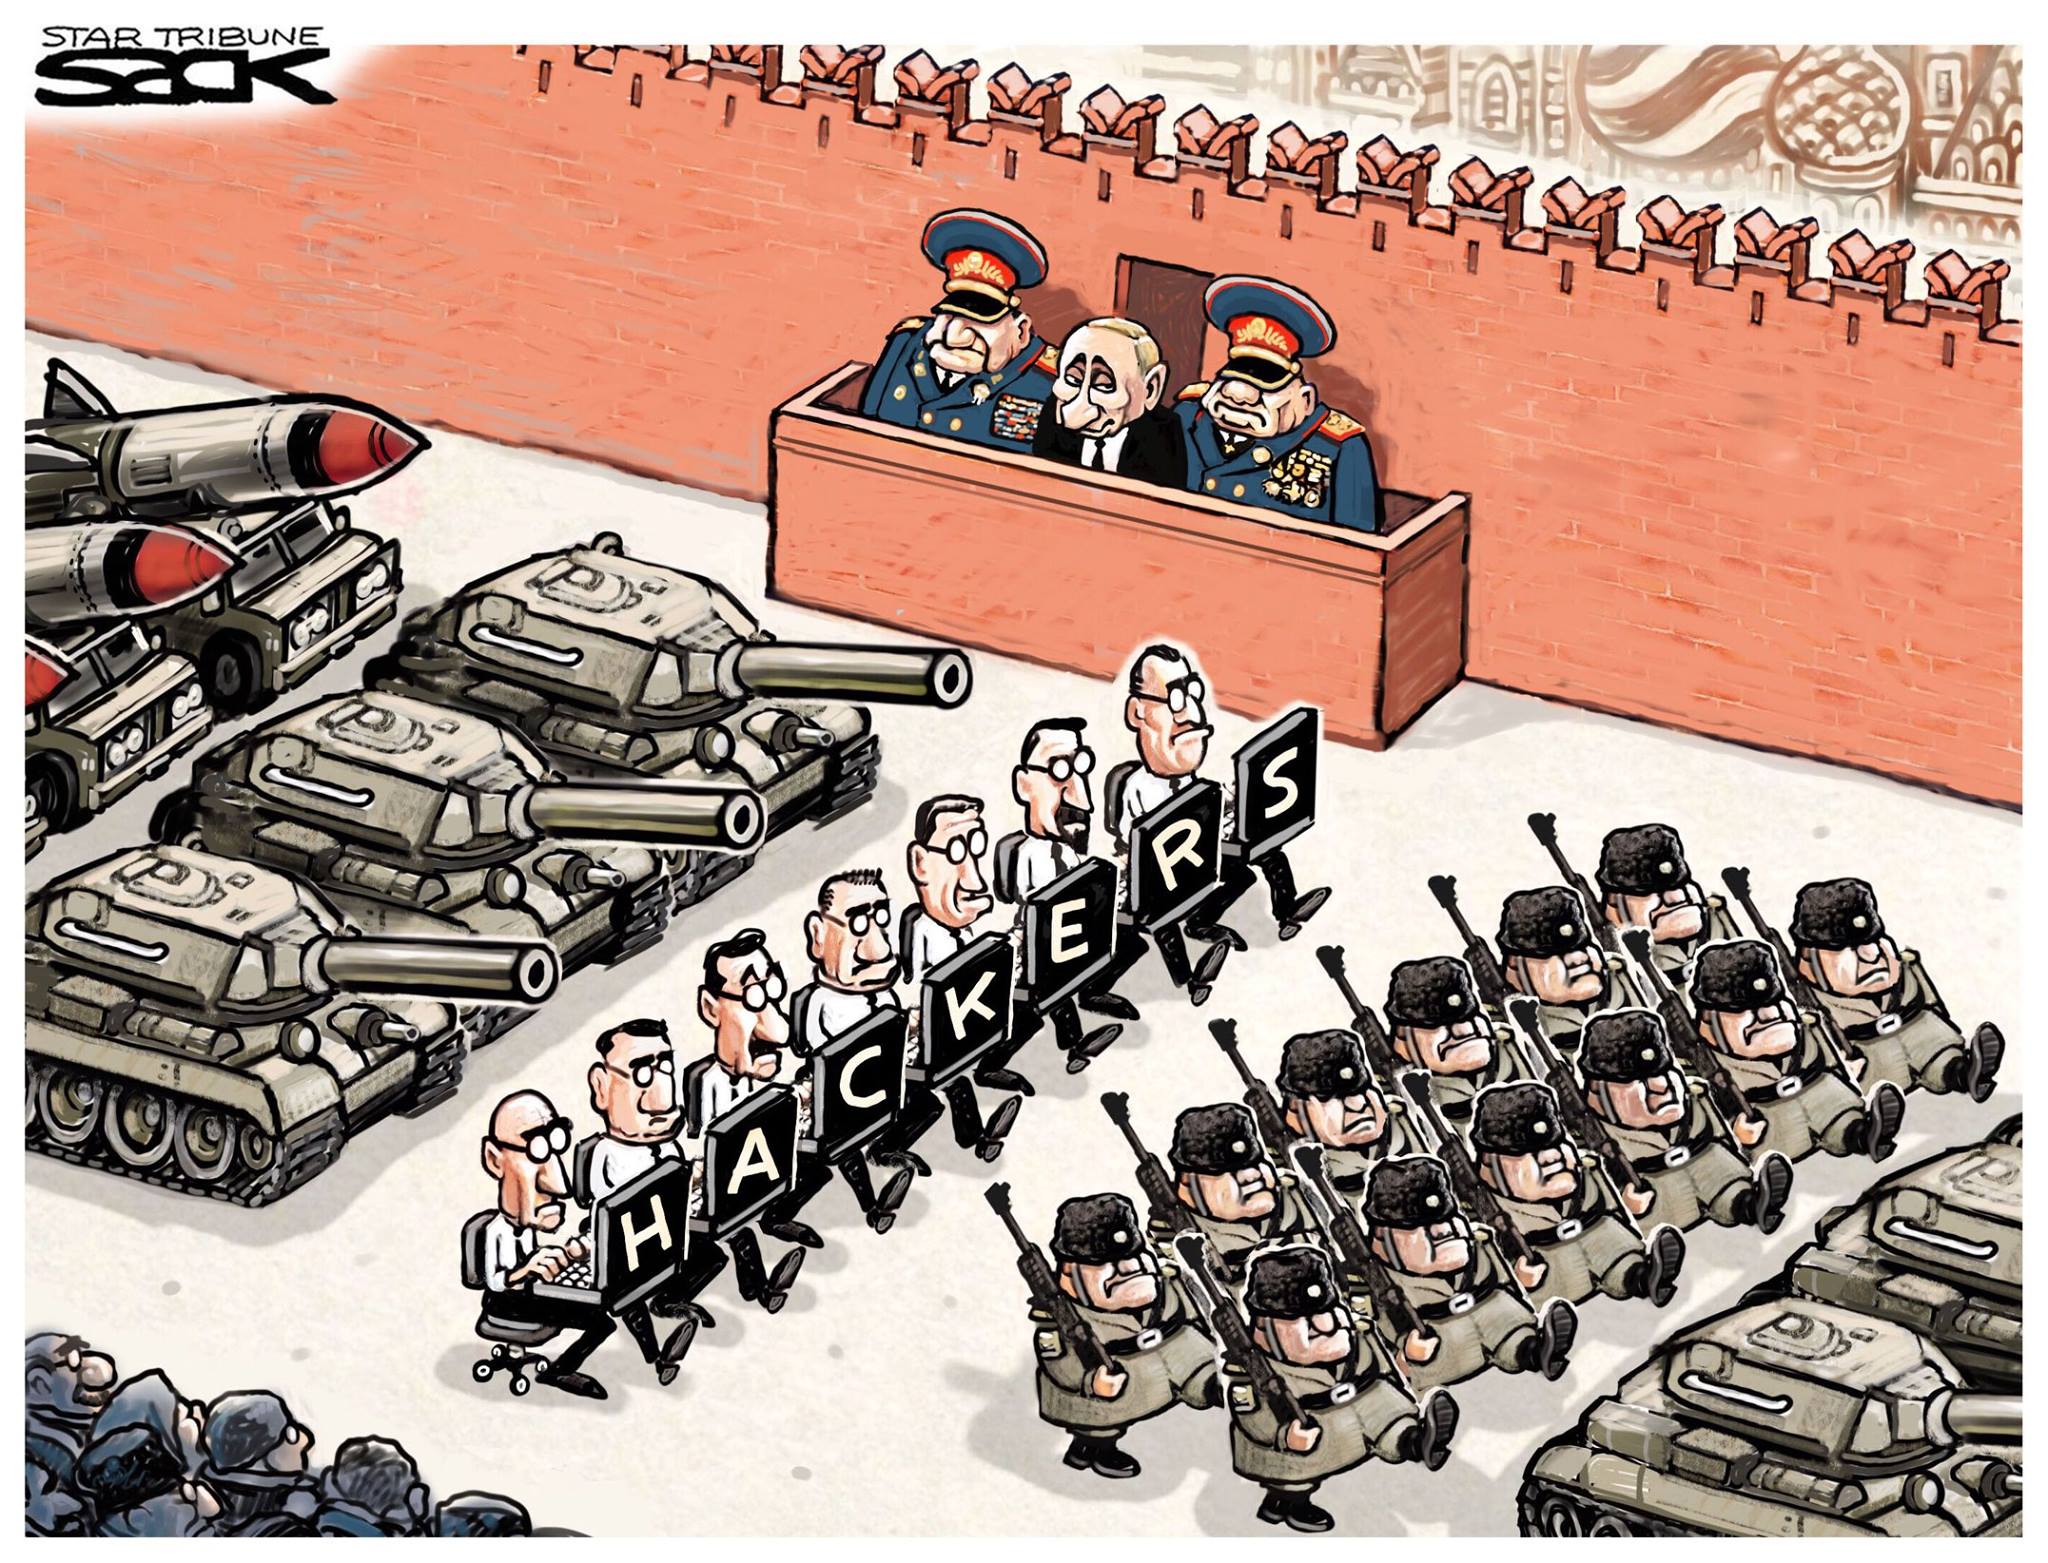 Proud Kremlin hackers in parade on Moscow's Red Square (Political cartoon by SACK / Star Tribute)